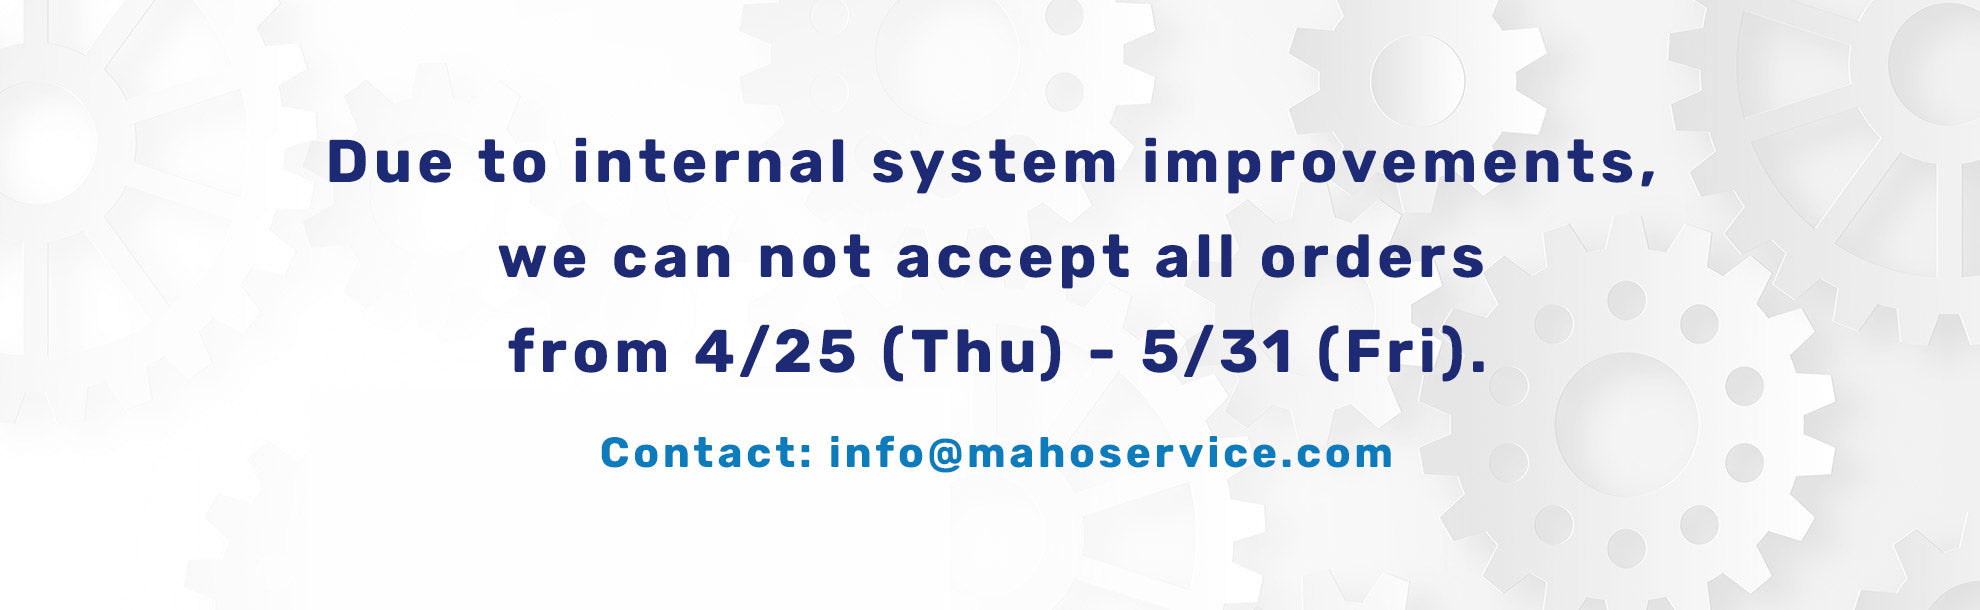 Due to internal system improvements, we can not accept all orders from 4/25 (Thu) - 5/31 (Fri). Contact: info@mahoservice.com